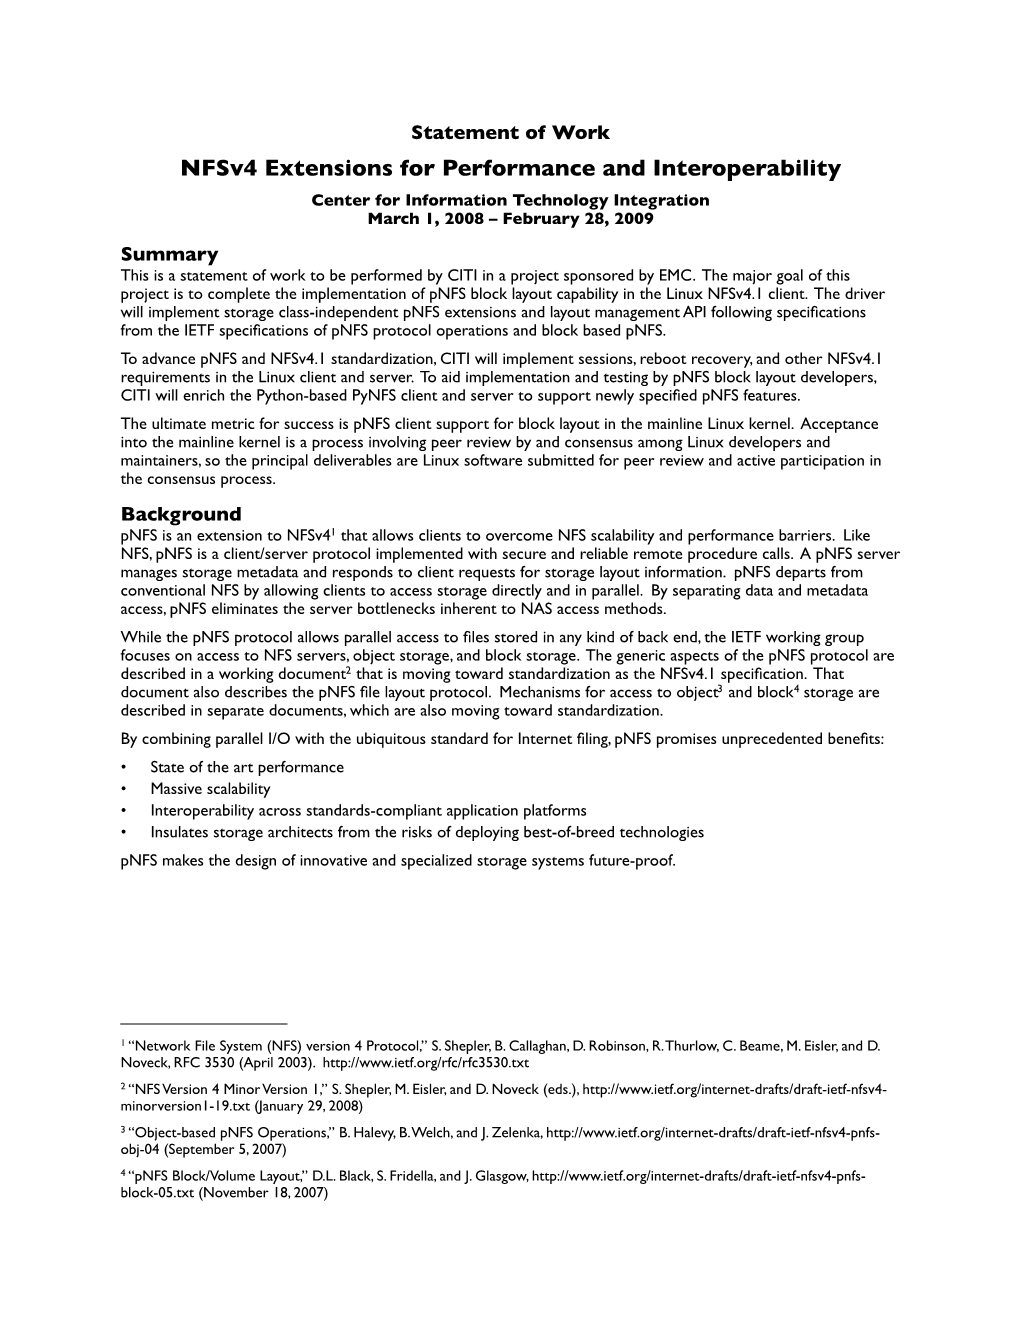 Nfsv4 Extensions for Performance and Interoperability